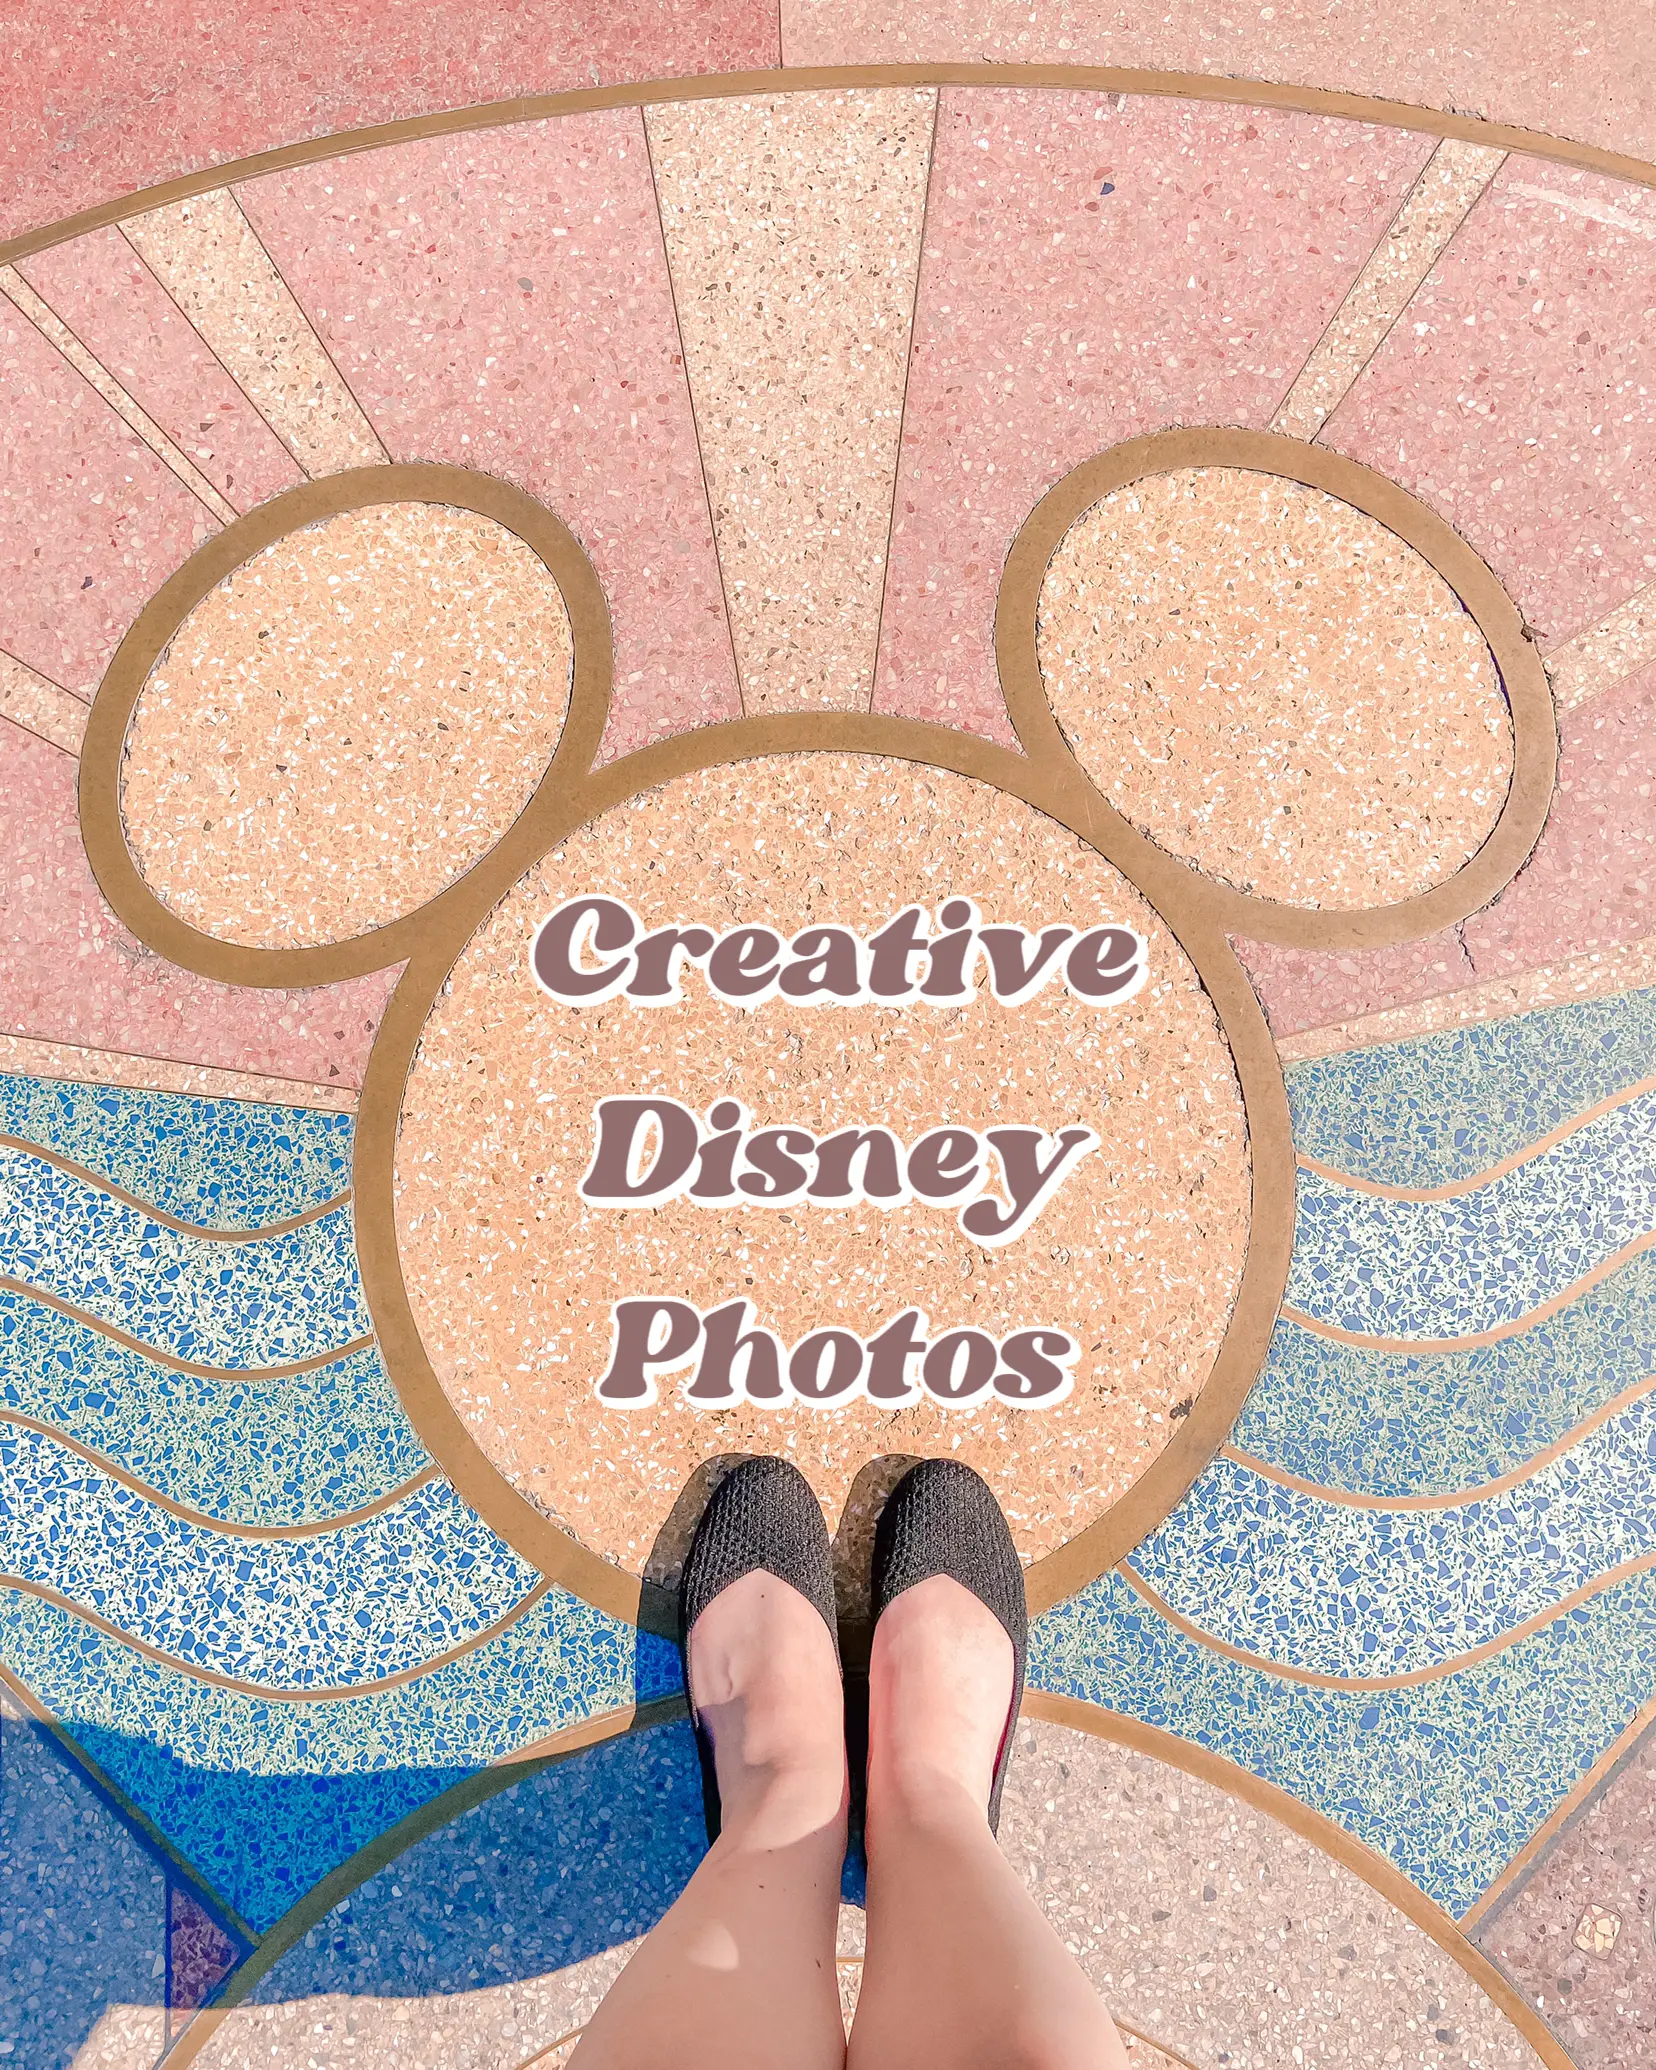  A person's feet are shown in the image, with the words "Creative Disney Photos" above them.